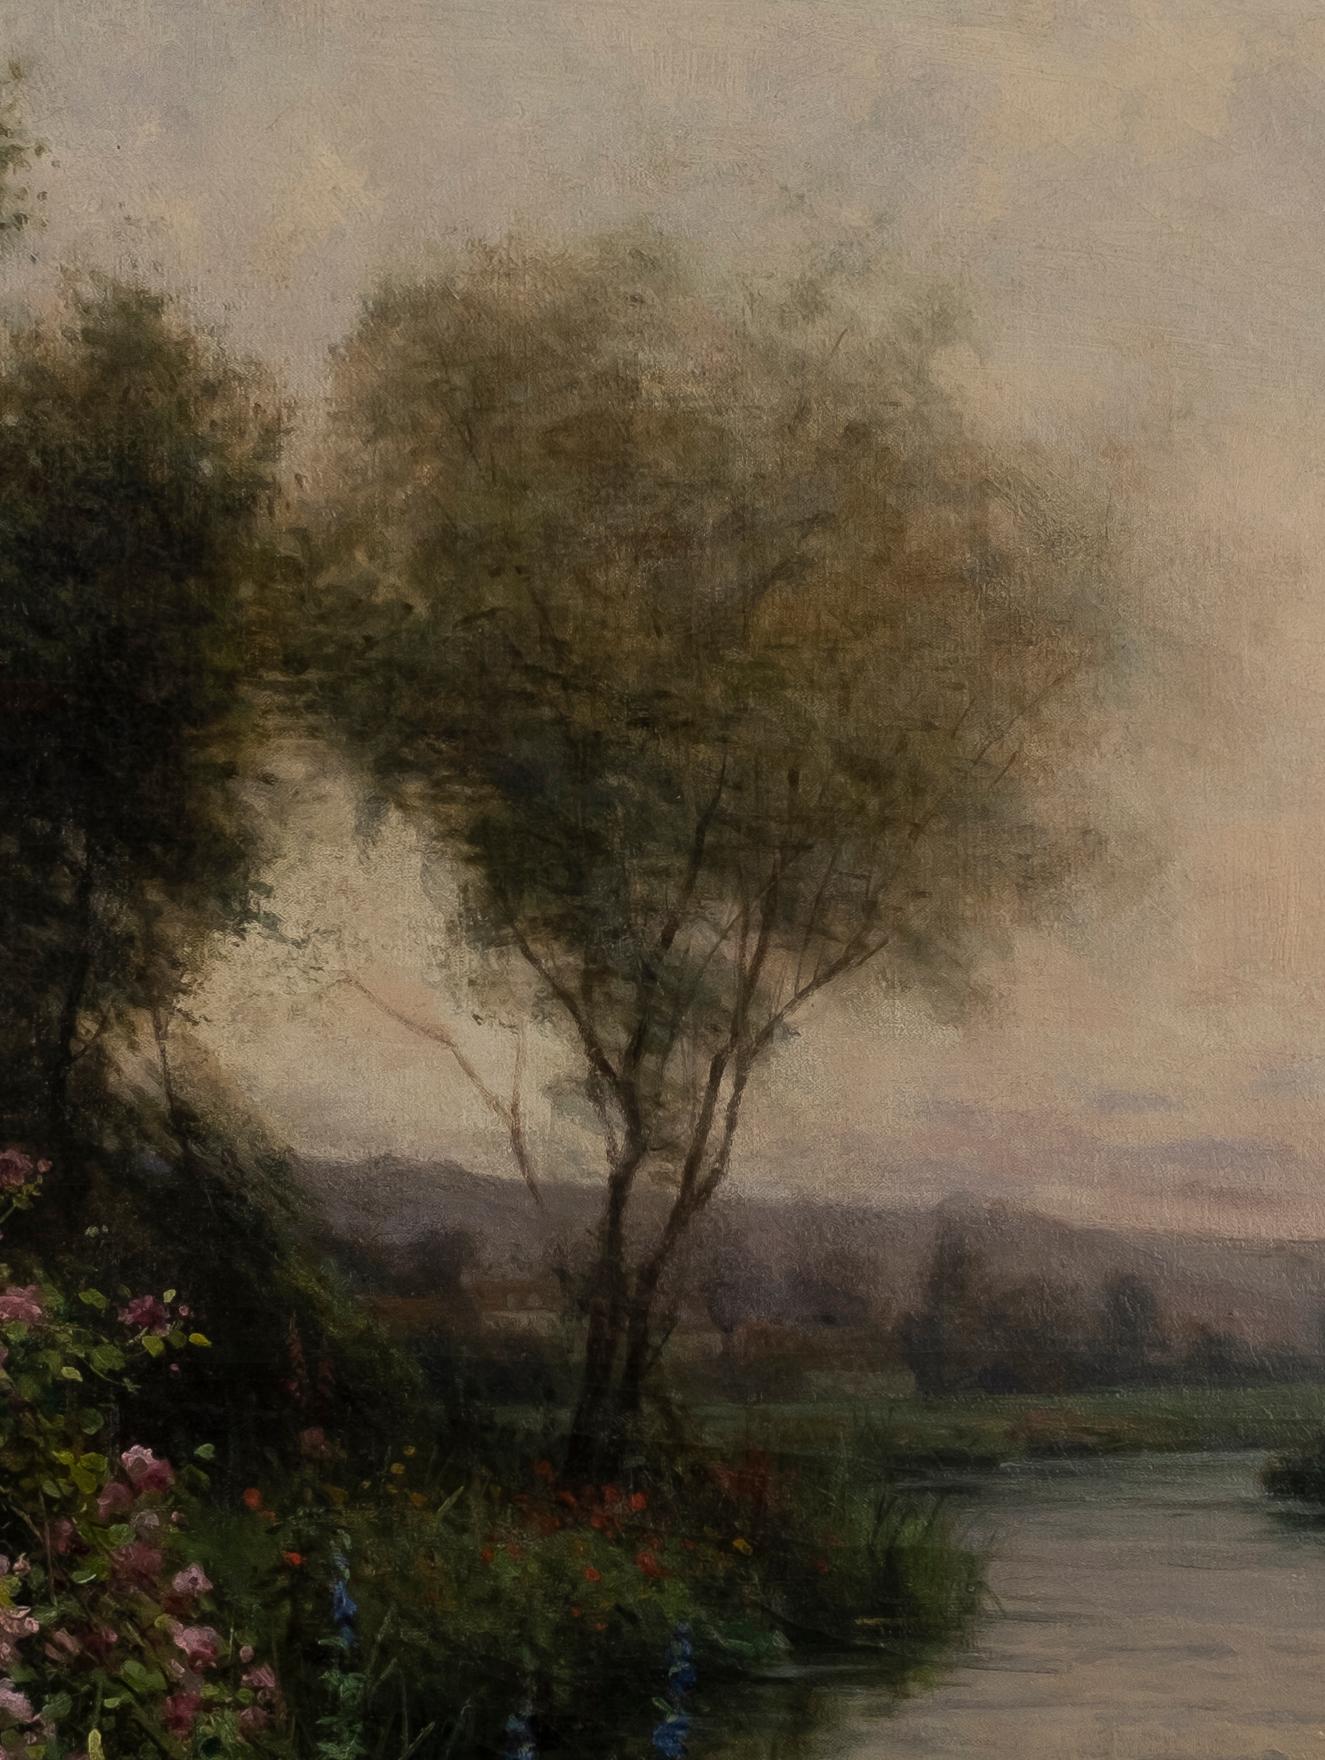 Flowers on the Riverbank landscape, France - Painting by Louis Aston Knight